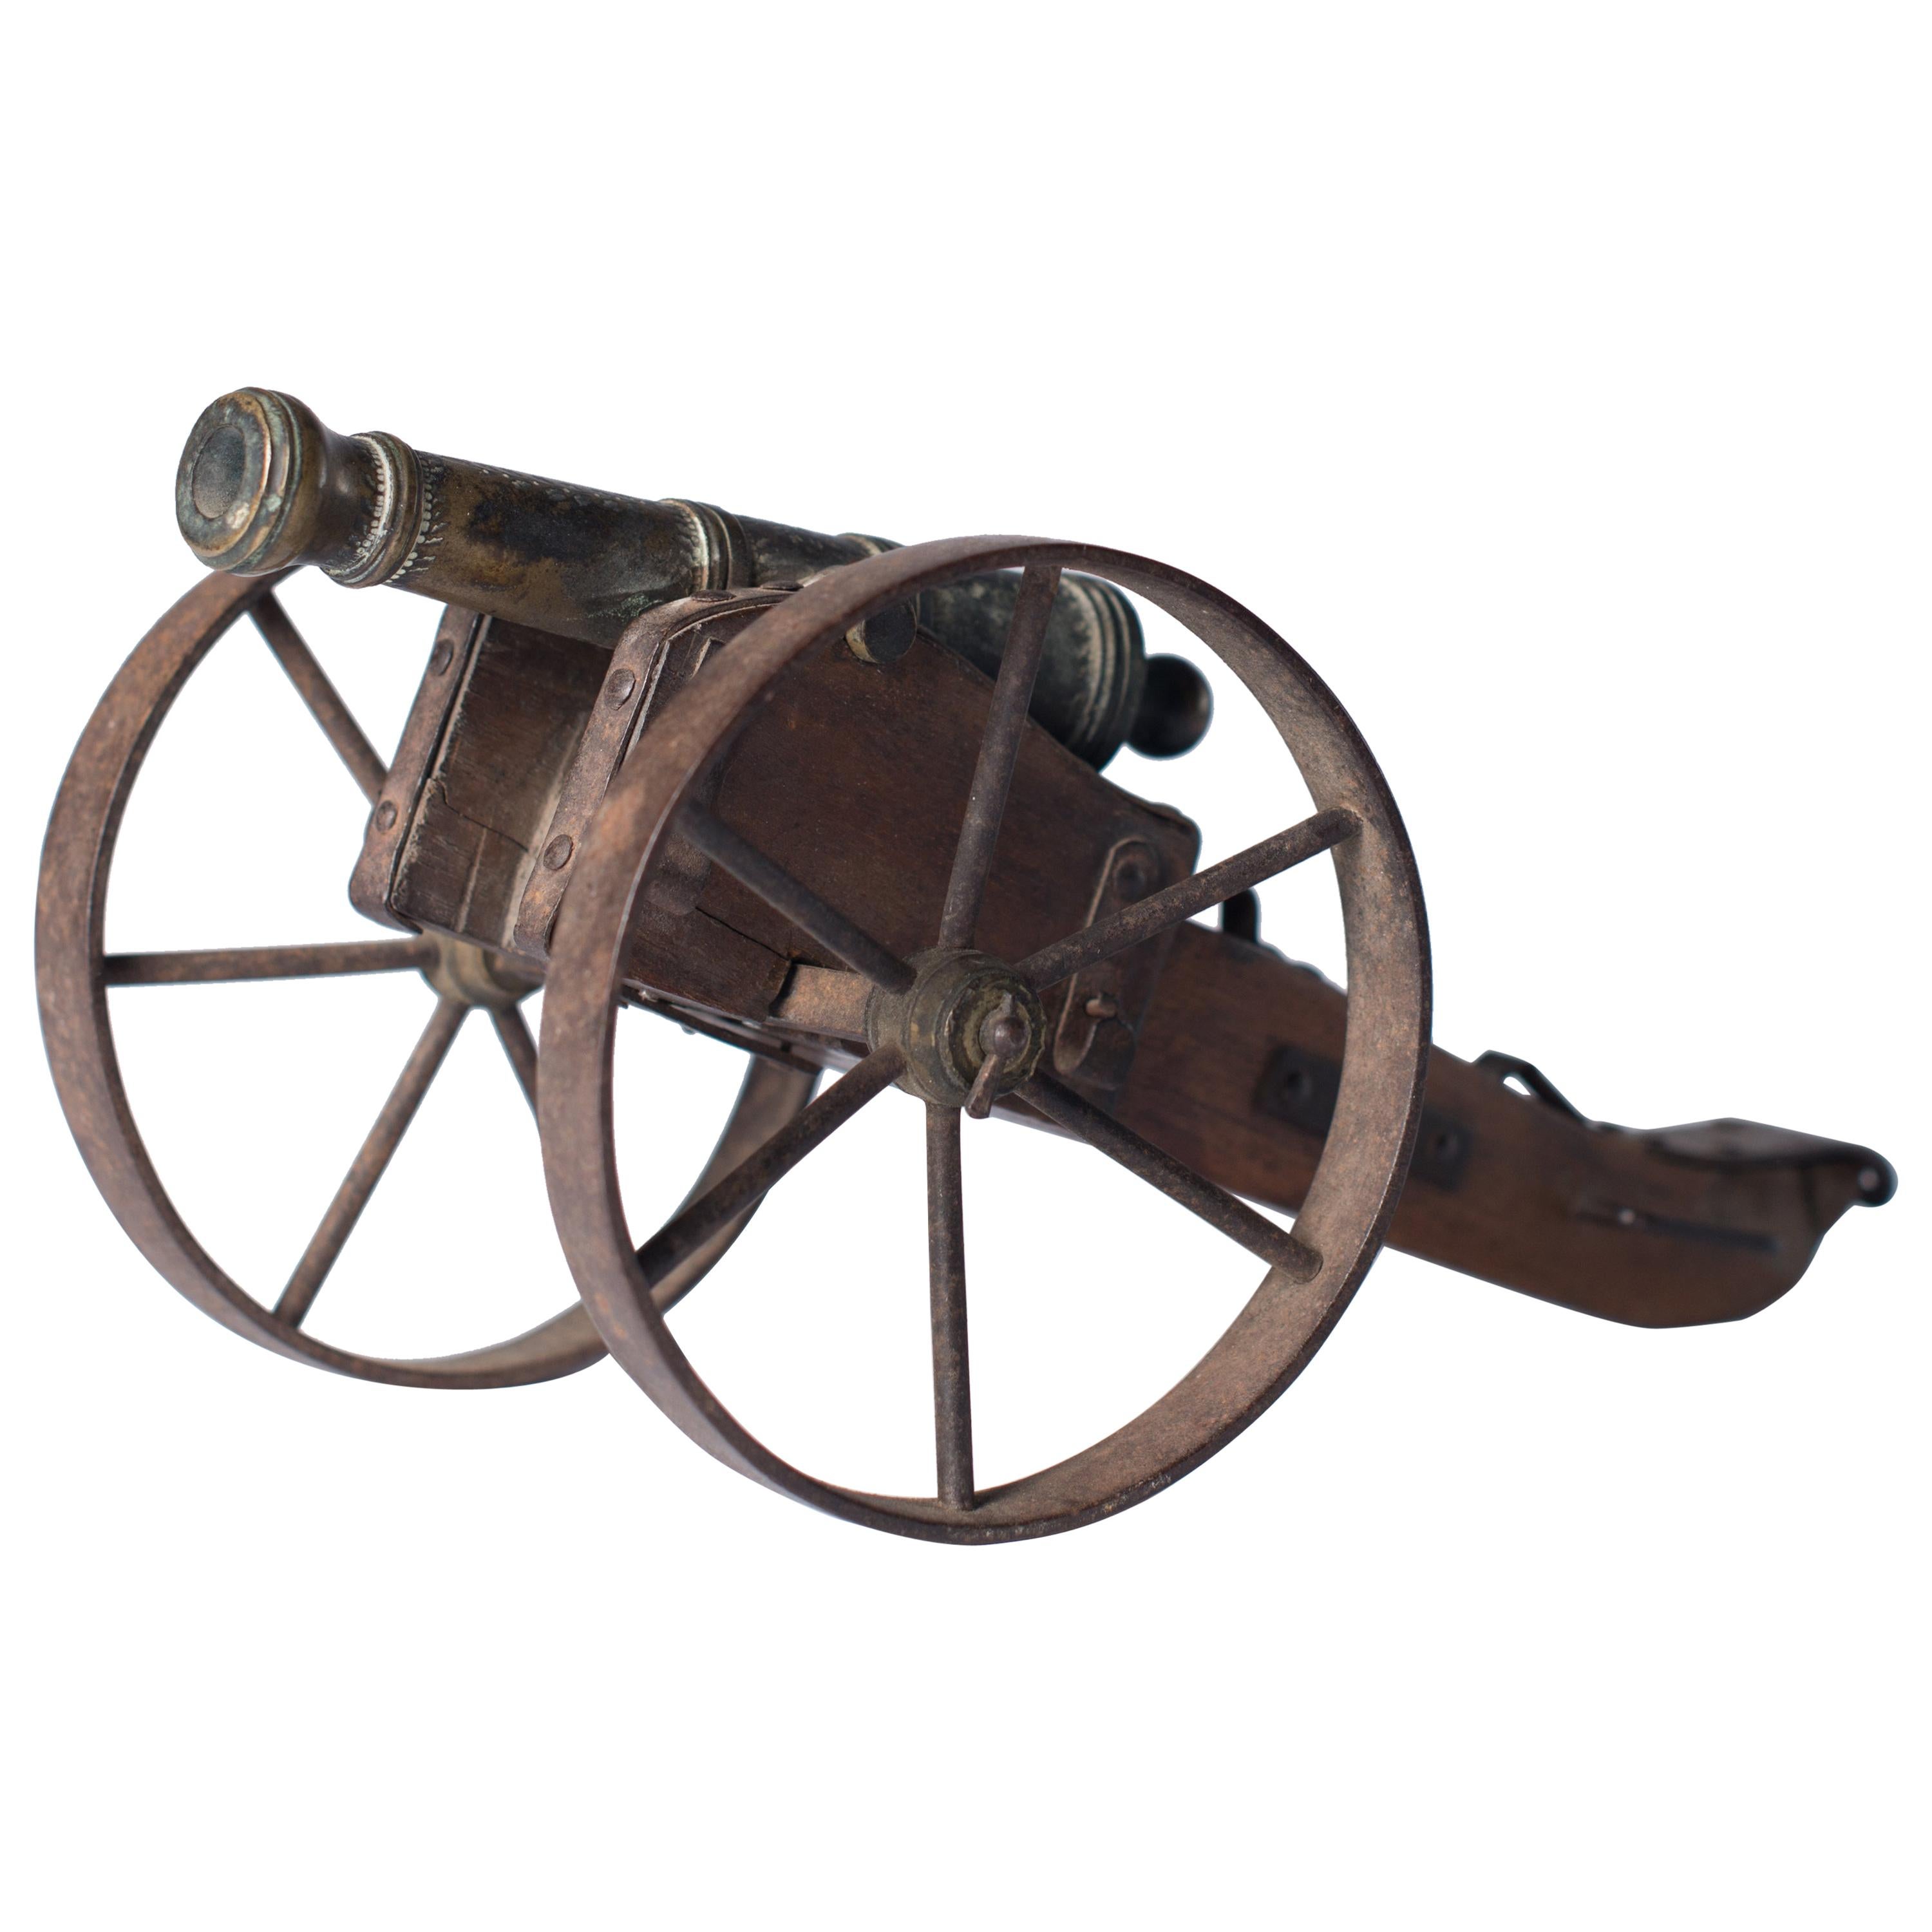 Miniature Patinated Bronze Canon on a Wooden Field Gun-Carriage, 19th Century